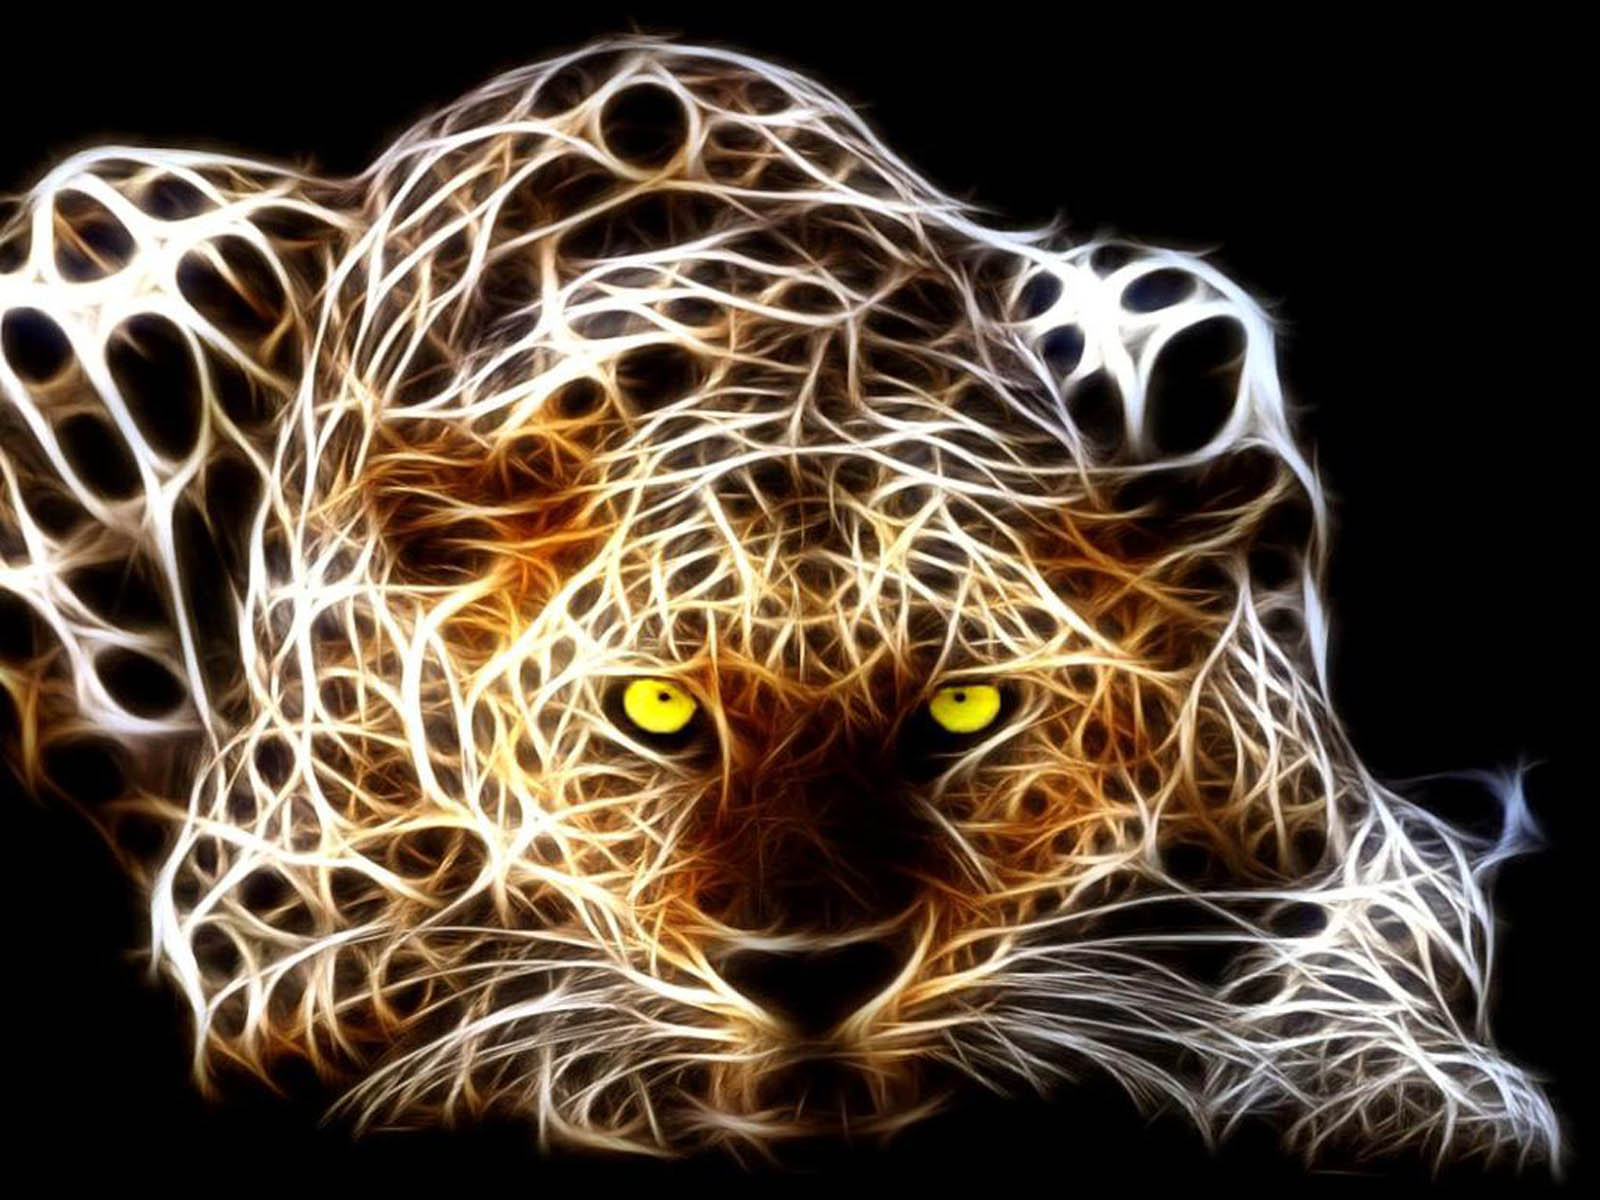  Tiger 3D Wallpapers Images Photos Pictures and Backgrounds for free